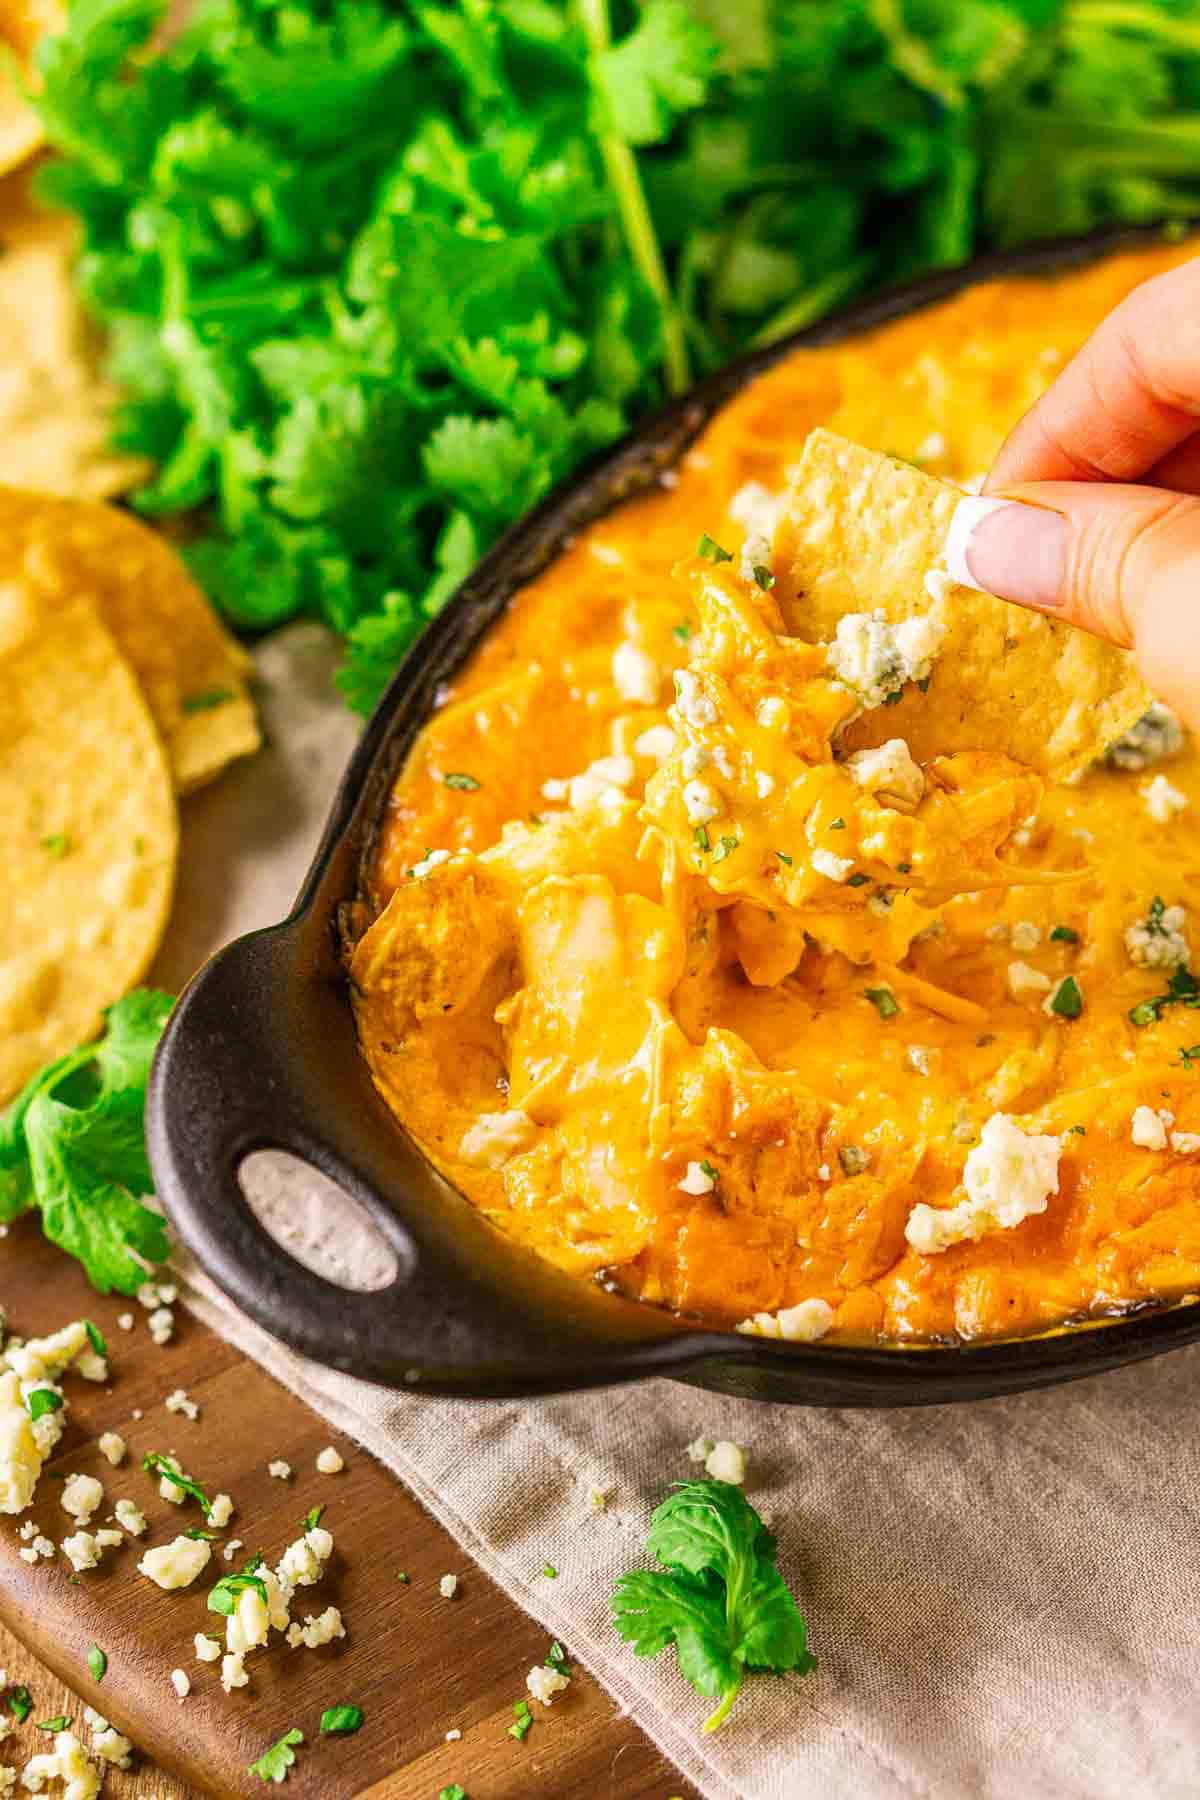 A hand dipping a tortilla chip into the smoked Buffalo chicken dip on a wooden plate with a neutral-colored napkin folder underneath the baking dish.